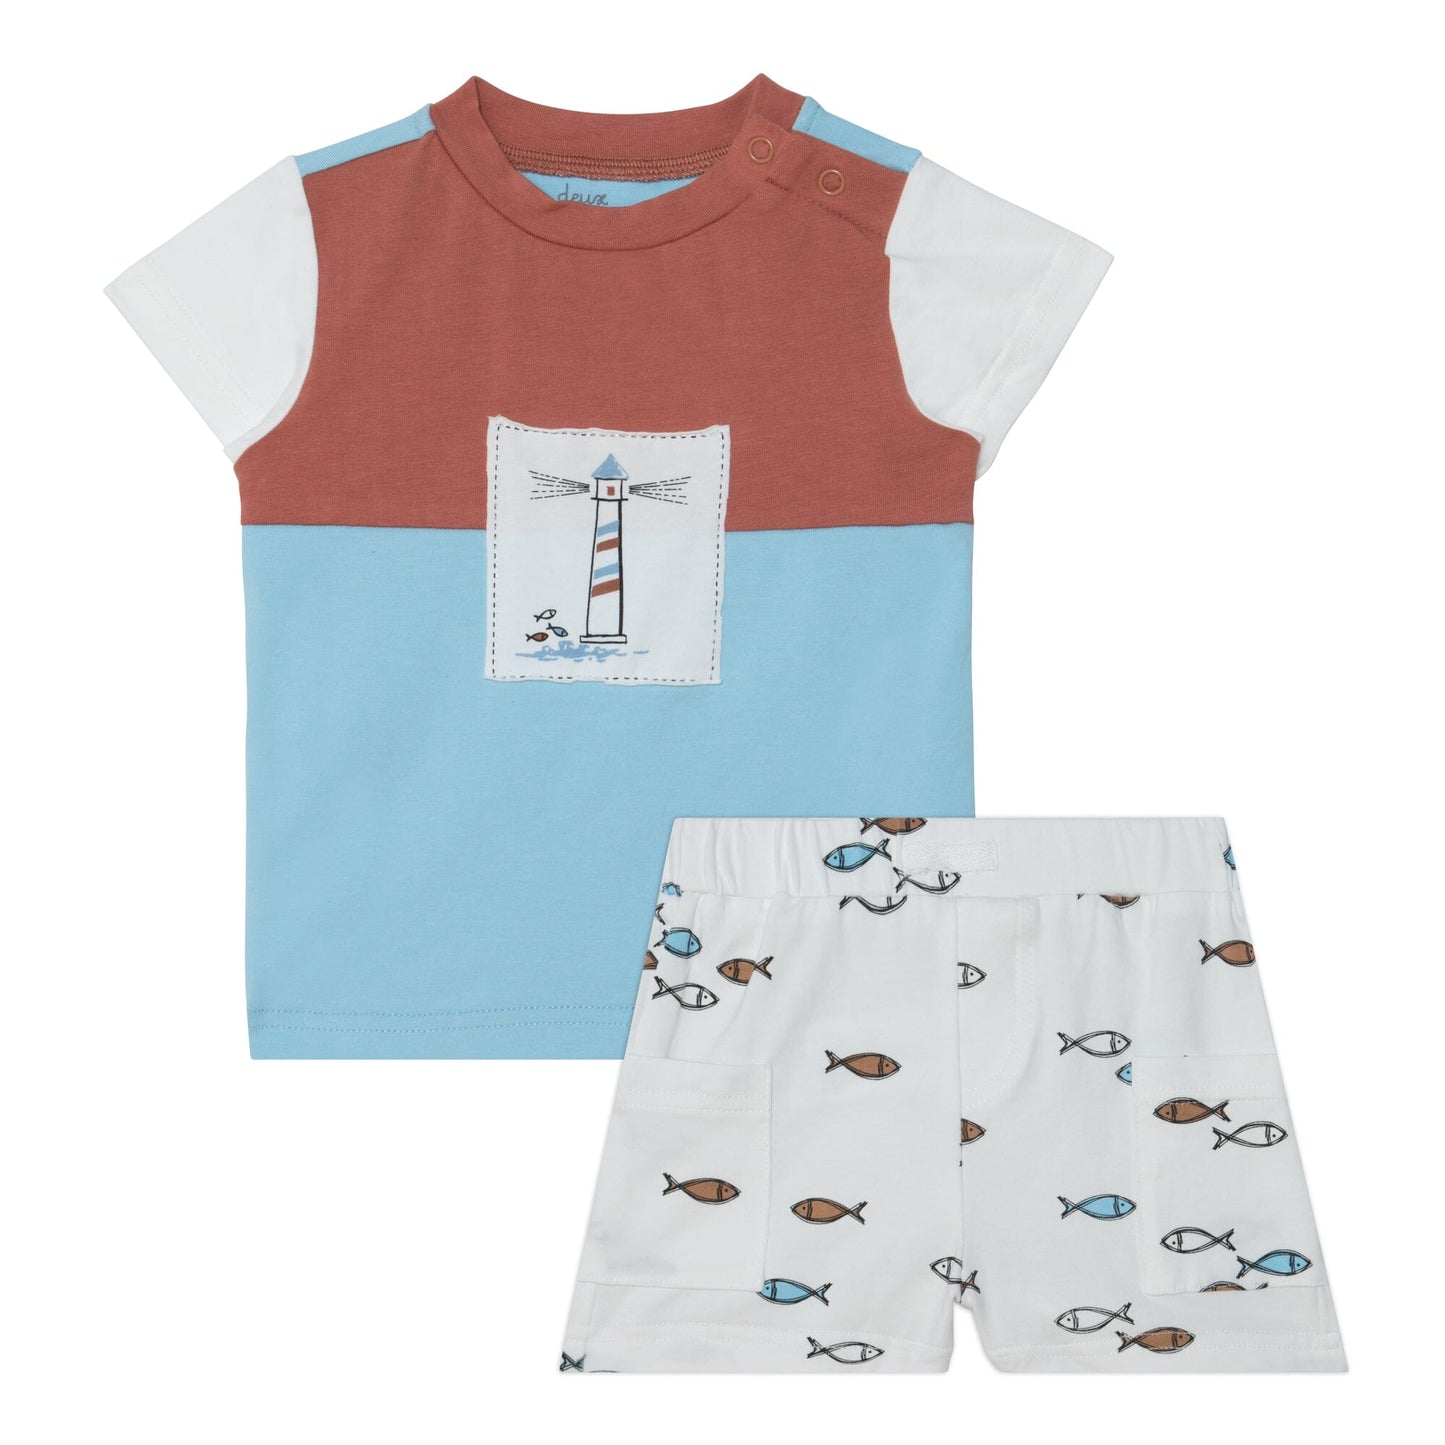 Organic Cotton Colorblocked Top & Short Set Brown & Blue With White Fish  Print